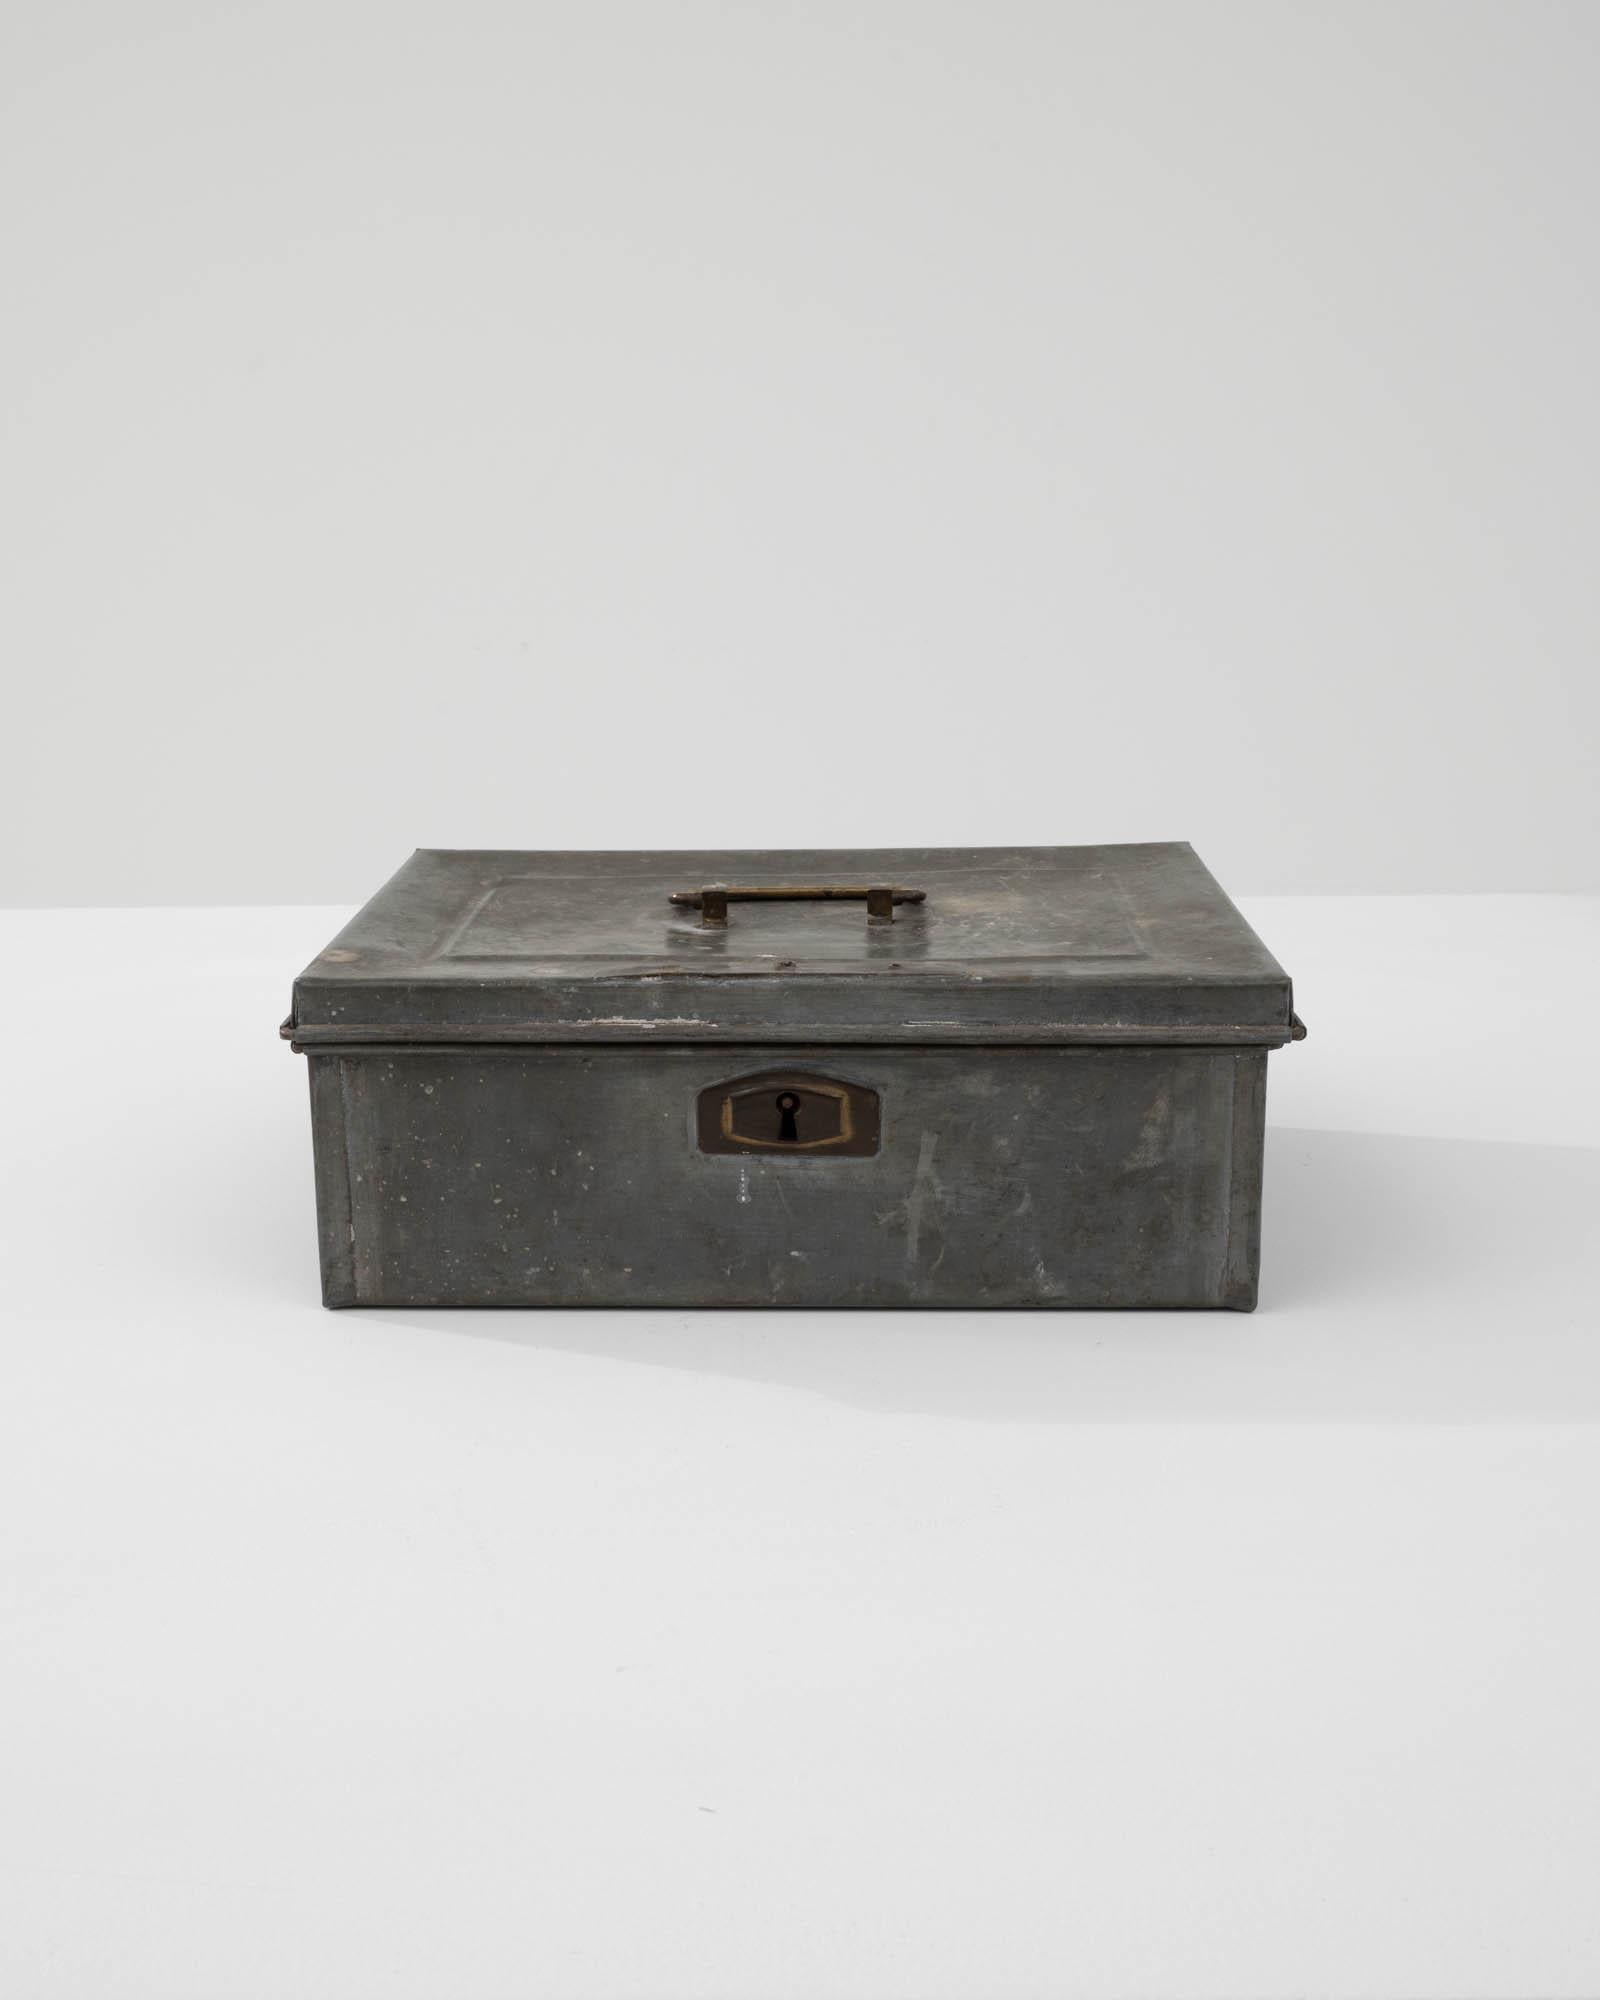 Delve into the industrial elegance of the early 20th century with this authentic Belgian metal box. Constructed with the durability of the era, this piece features a weathered patina that adds depth and character, hinting at the storied past of a